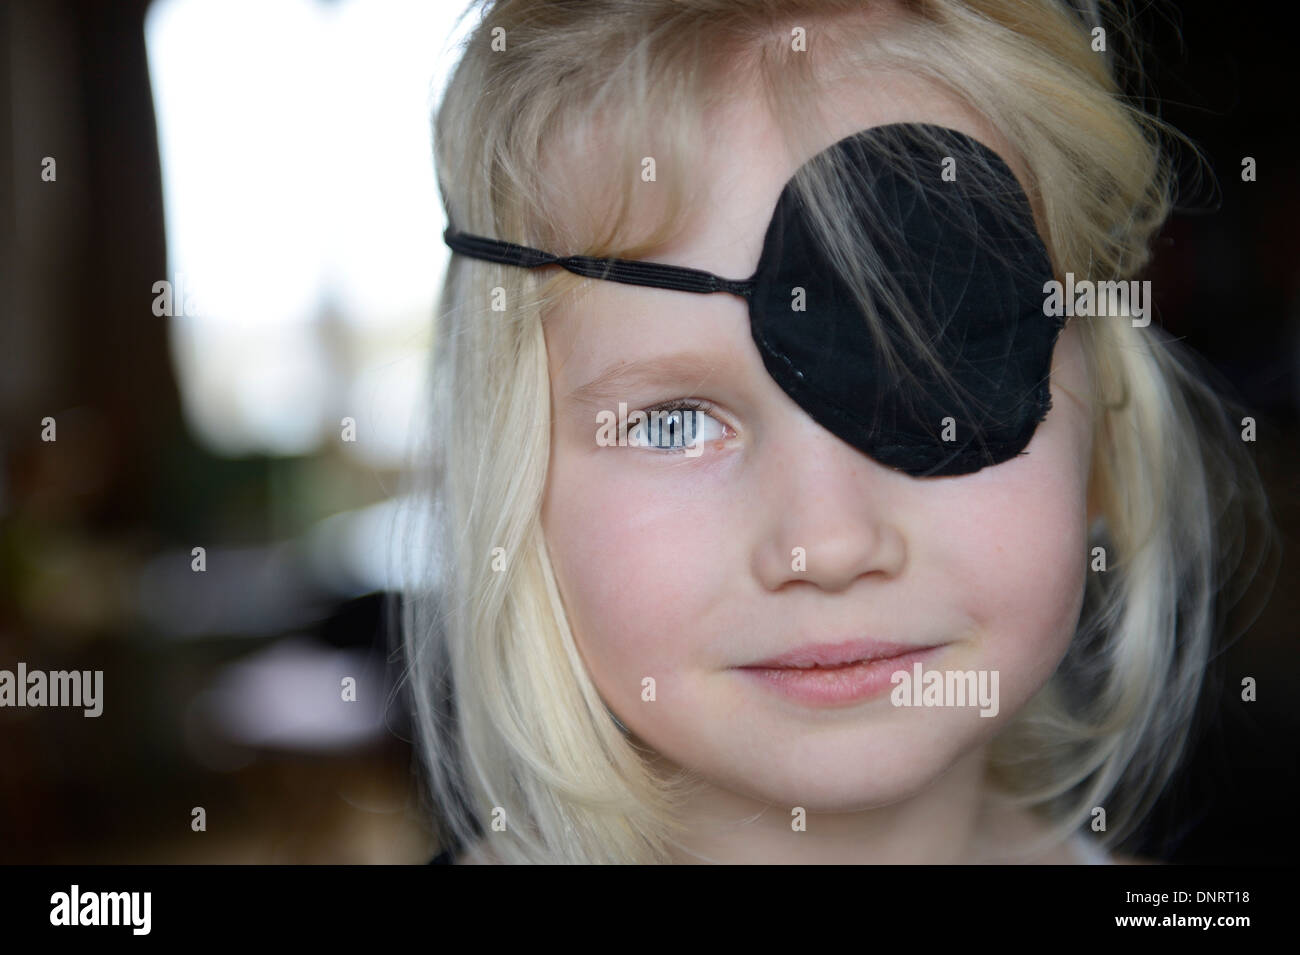 An 8 year old girl wearing a black eye patch Stock Photo